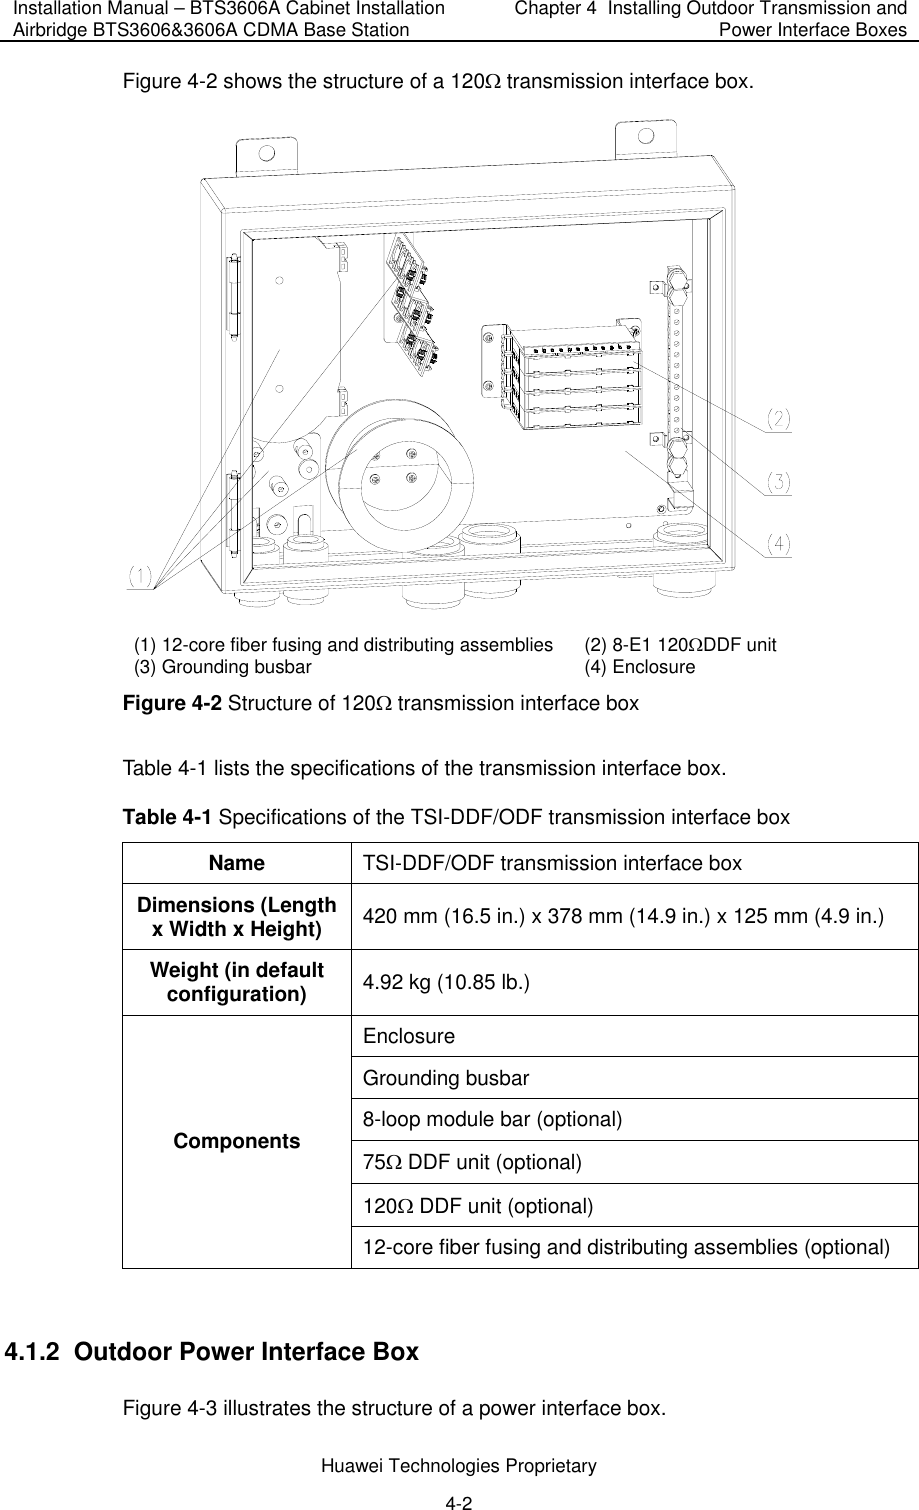 Installation Manual – BTS3606A Cabinet Installation Airbridge BTS3606&amp;3606A CDMA Base Station  Chapter 4  Installing Outdoor Transmission and Power Interface Boxes  Huawei Technologies Proprietary 4-2 Figure 4-2 shows the structure of a 120Ω transmission interface box.  (1) 12-core fiber fusing and distributing assemblies (2) 8-E1 120ΩDDF unit (3) Grounding busbar (4) Enclosure Figure 4-2 Structure of 120Ω transmission interface box Table 4-1 lists the specifications of the transmission interface box. Table 4-1 Specifications of the TSI-DDF/ODF transmission interface box Name TSI-DDF/ODF transmission interface box  Dimensions (Length x Width x Height)  420 mm (16.5 in.) x 378 mm (14.9 in.) x 125 mm (4.9 in.) Weight (in default configuration) 4.92 kg (10.85 lb.) Enclosure Grounding busbar 8-loop module bar (optional) 75Ω DDF unit (optional) 120Ω DDF unit (optional) Components 12-core fiber fusing and distributing assemblies (optional)  4.1.2  Outdoor Power Interface Box Figure 4-3 illustrates the structure of a power interface box. 